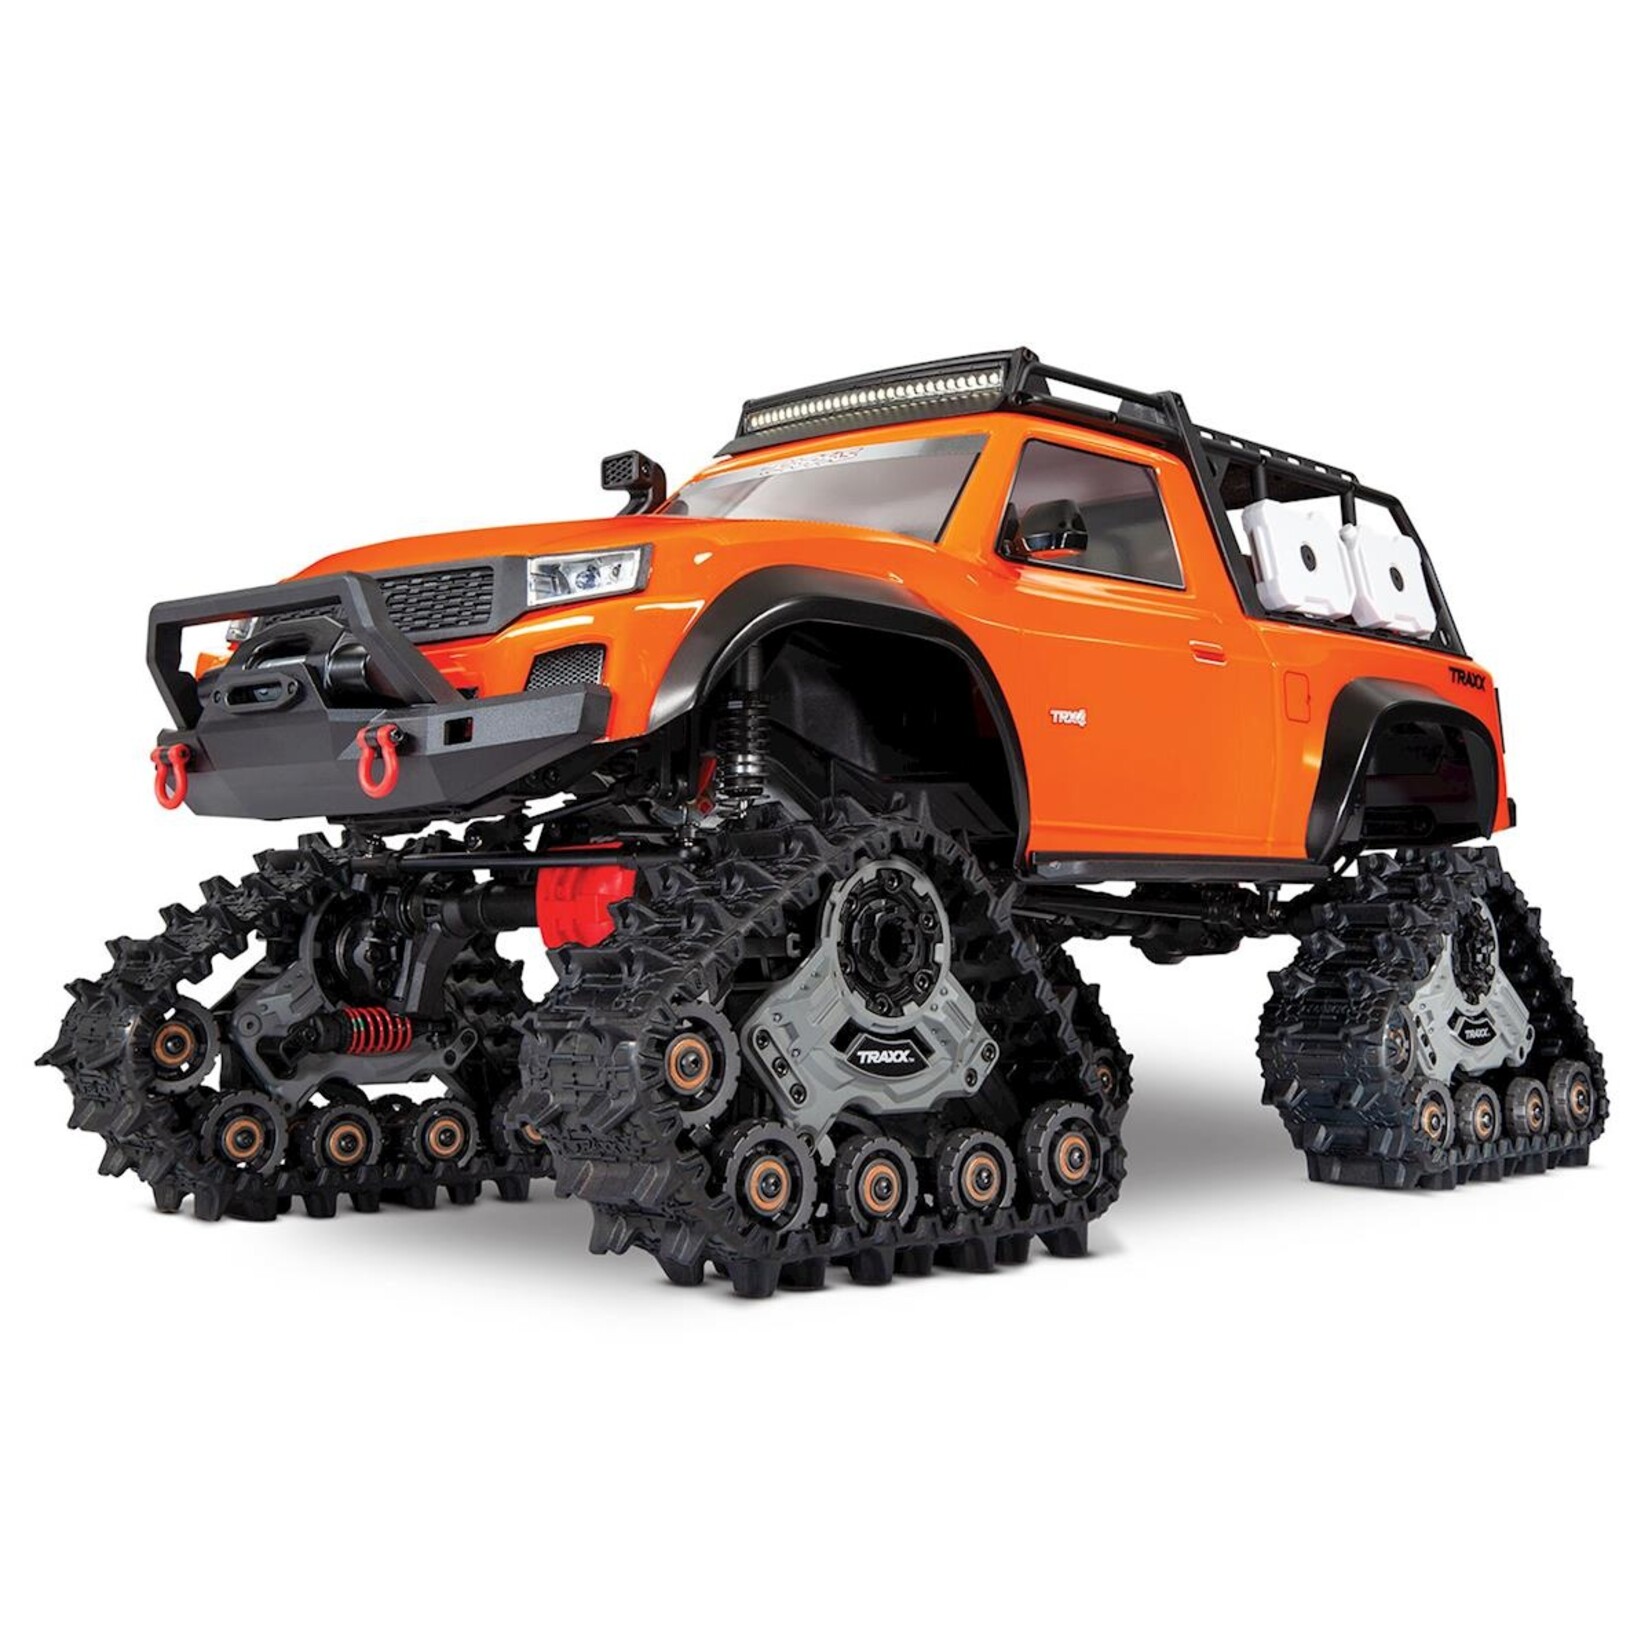 Traxxas TRX-4 Equipped w/TRAXX (Orange) #82034-4-ORNG - Hobby Time RC